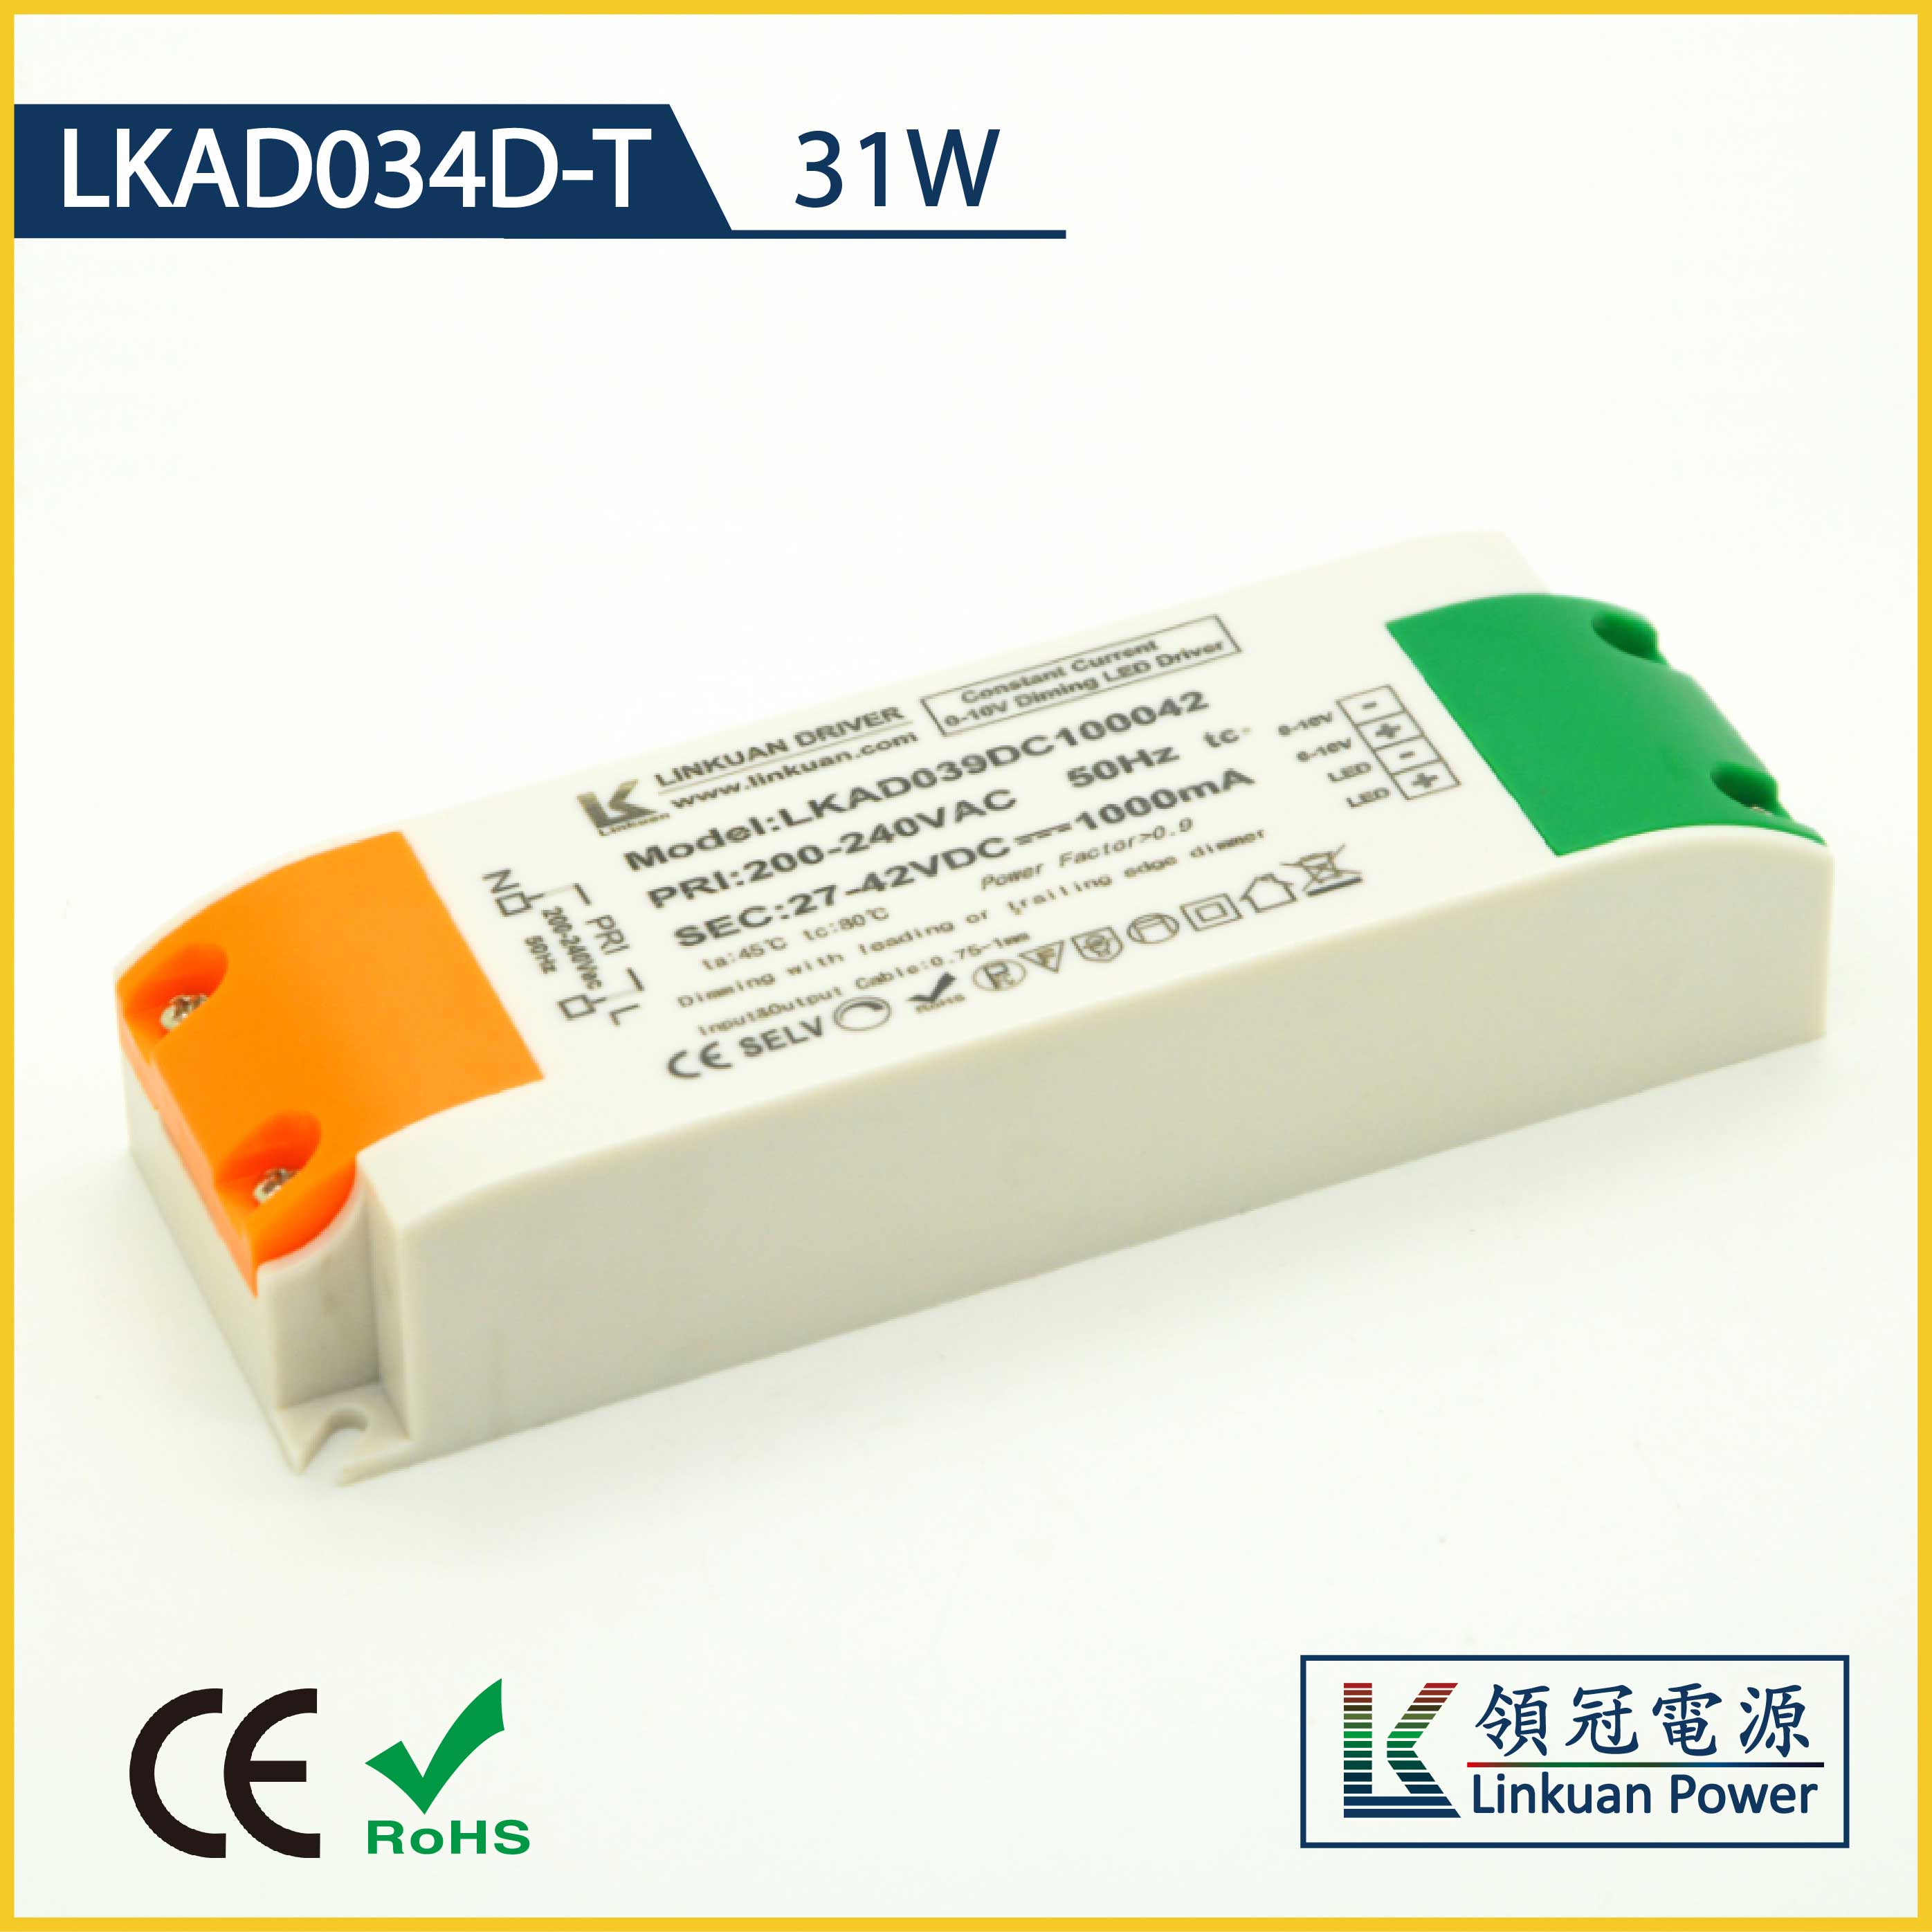 LKAD034D-T 31W 10-42V 750mA triac dimmable led driver with DIP switch